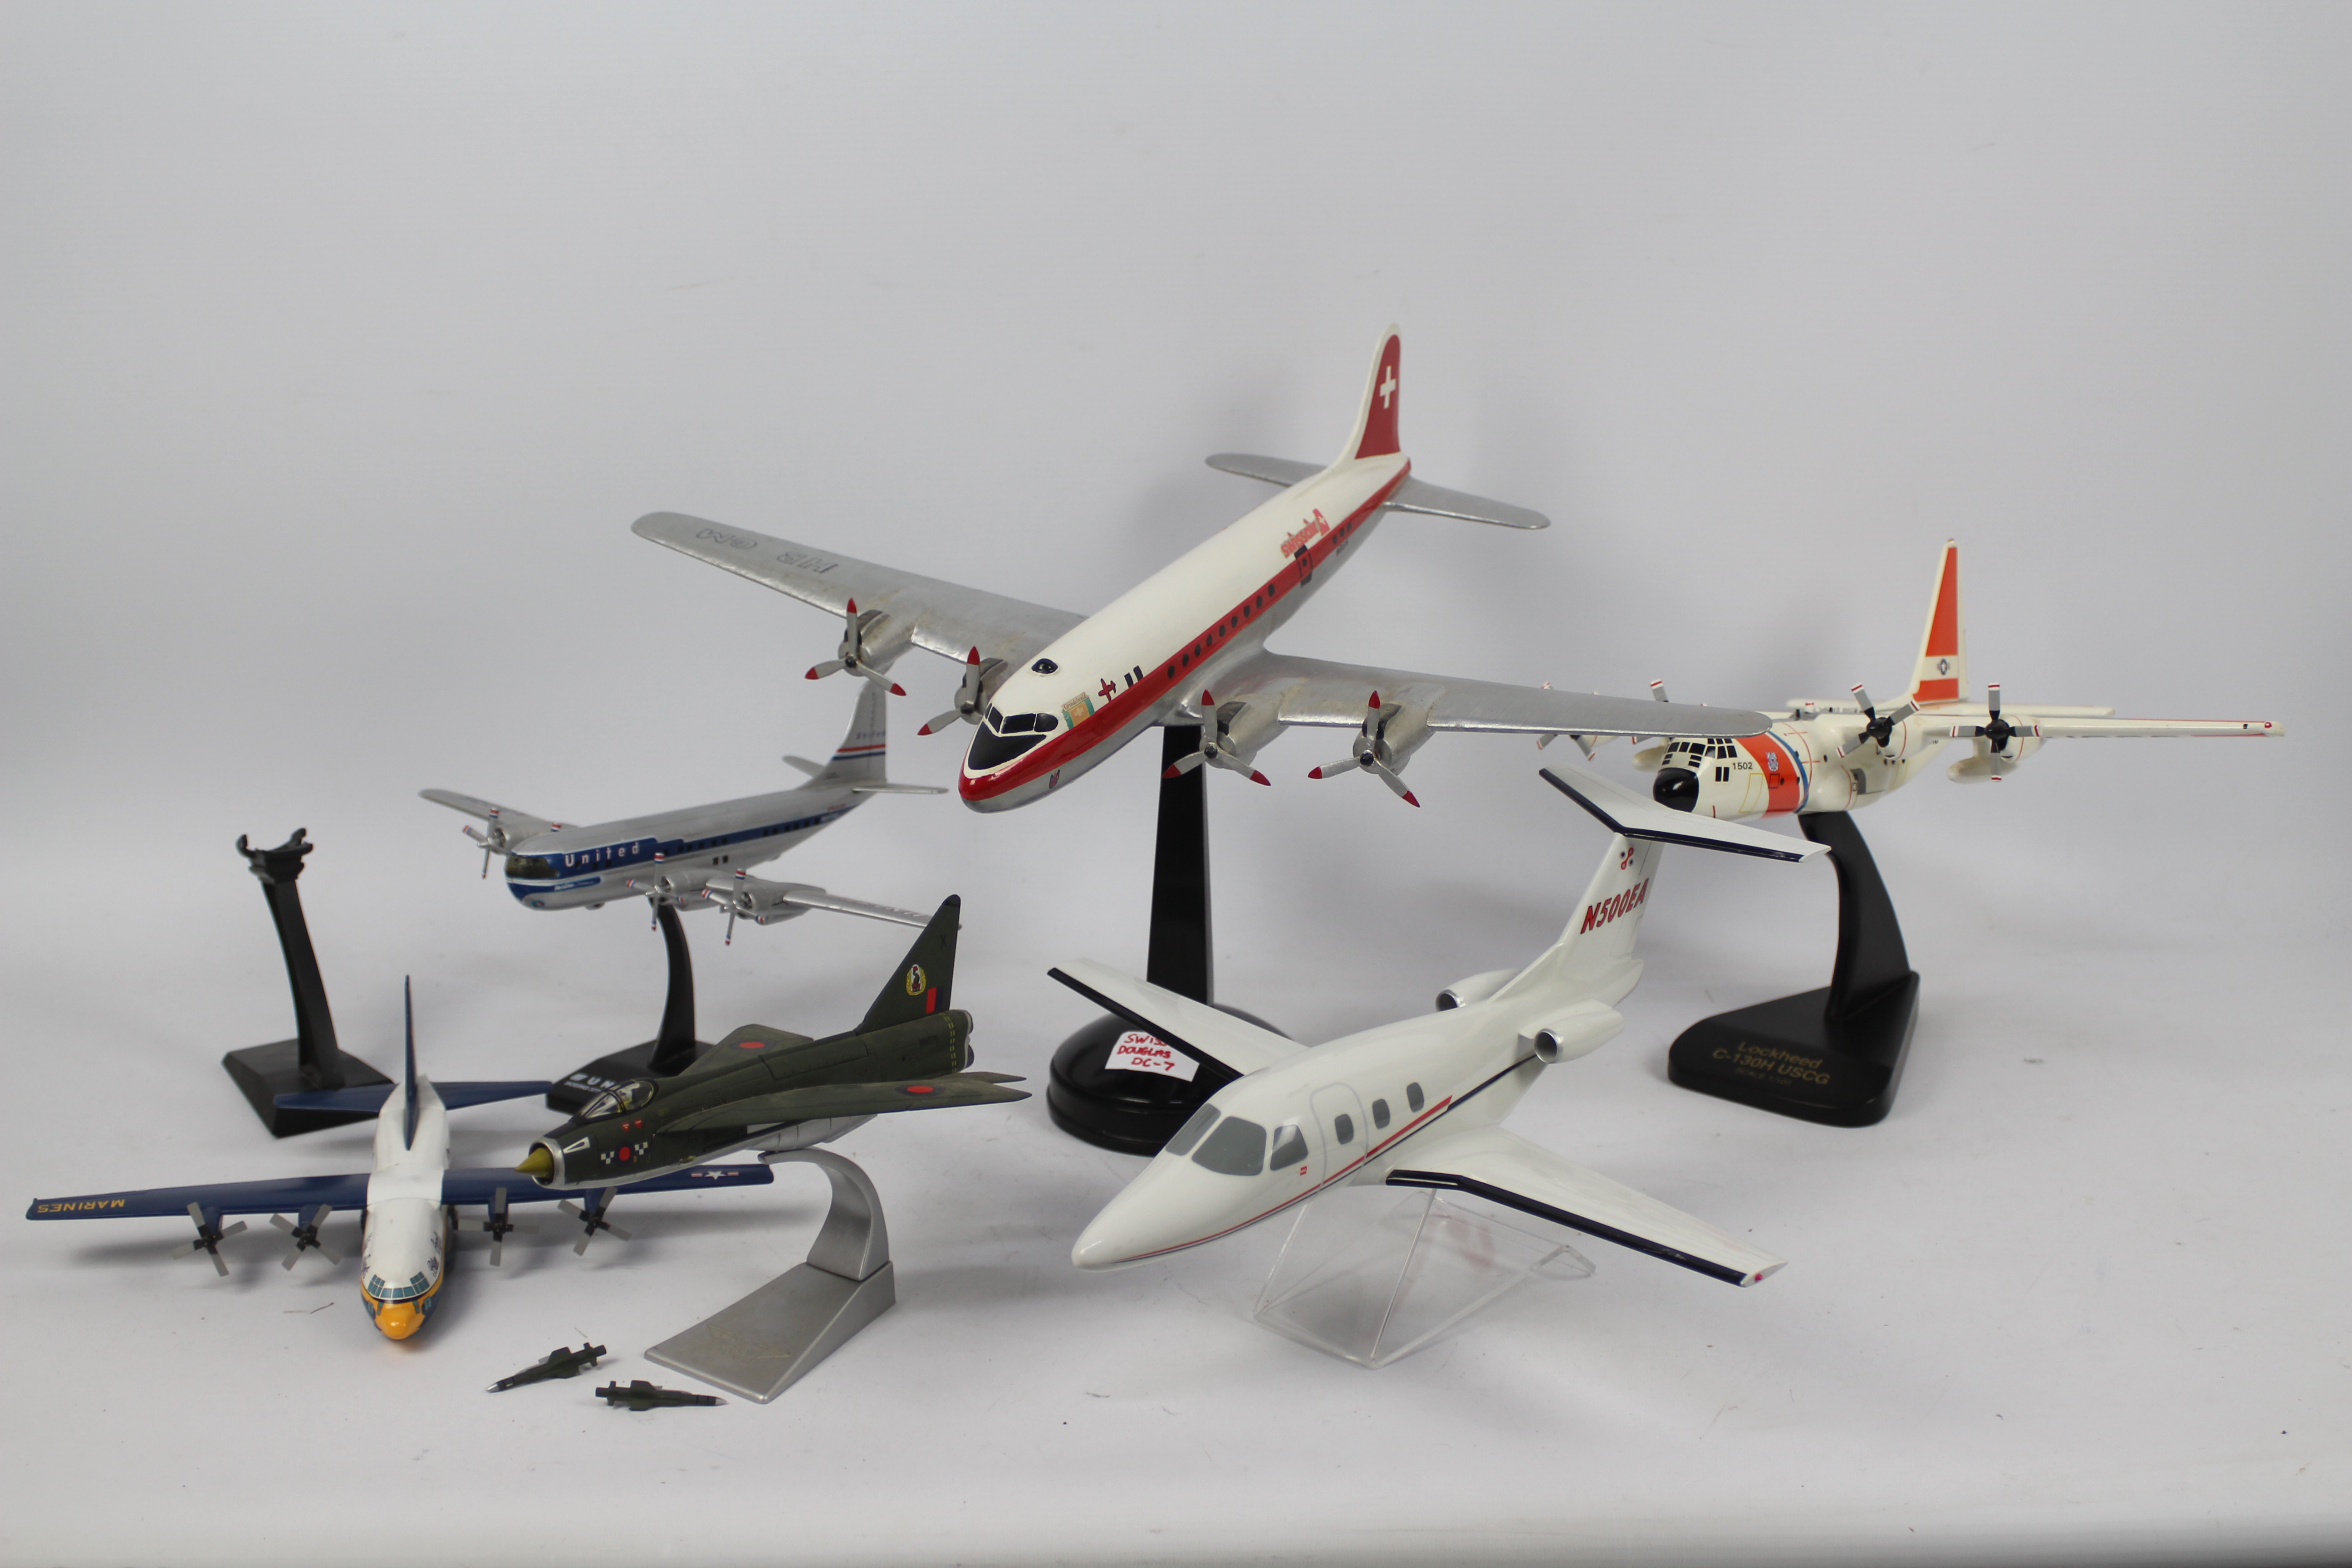 Space Models - Corgi - 6 x unboxed aircraft models on display stands,